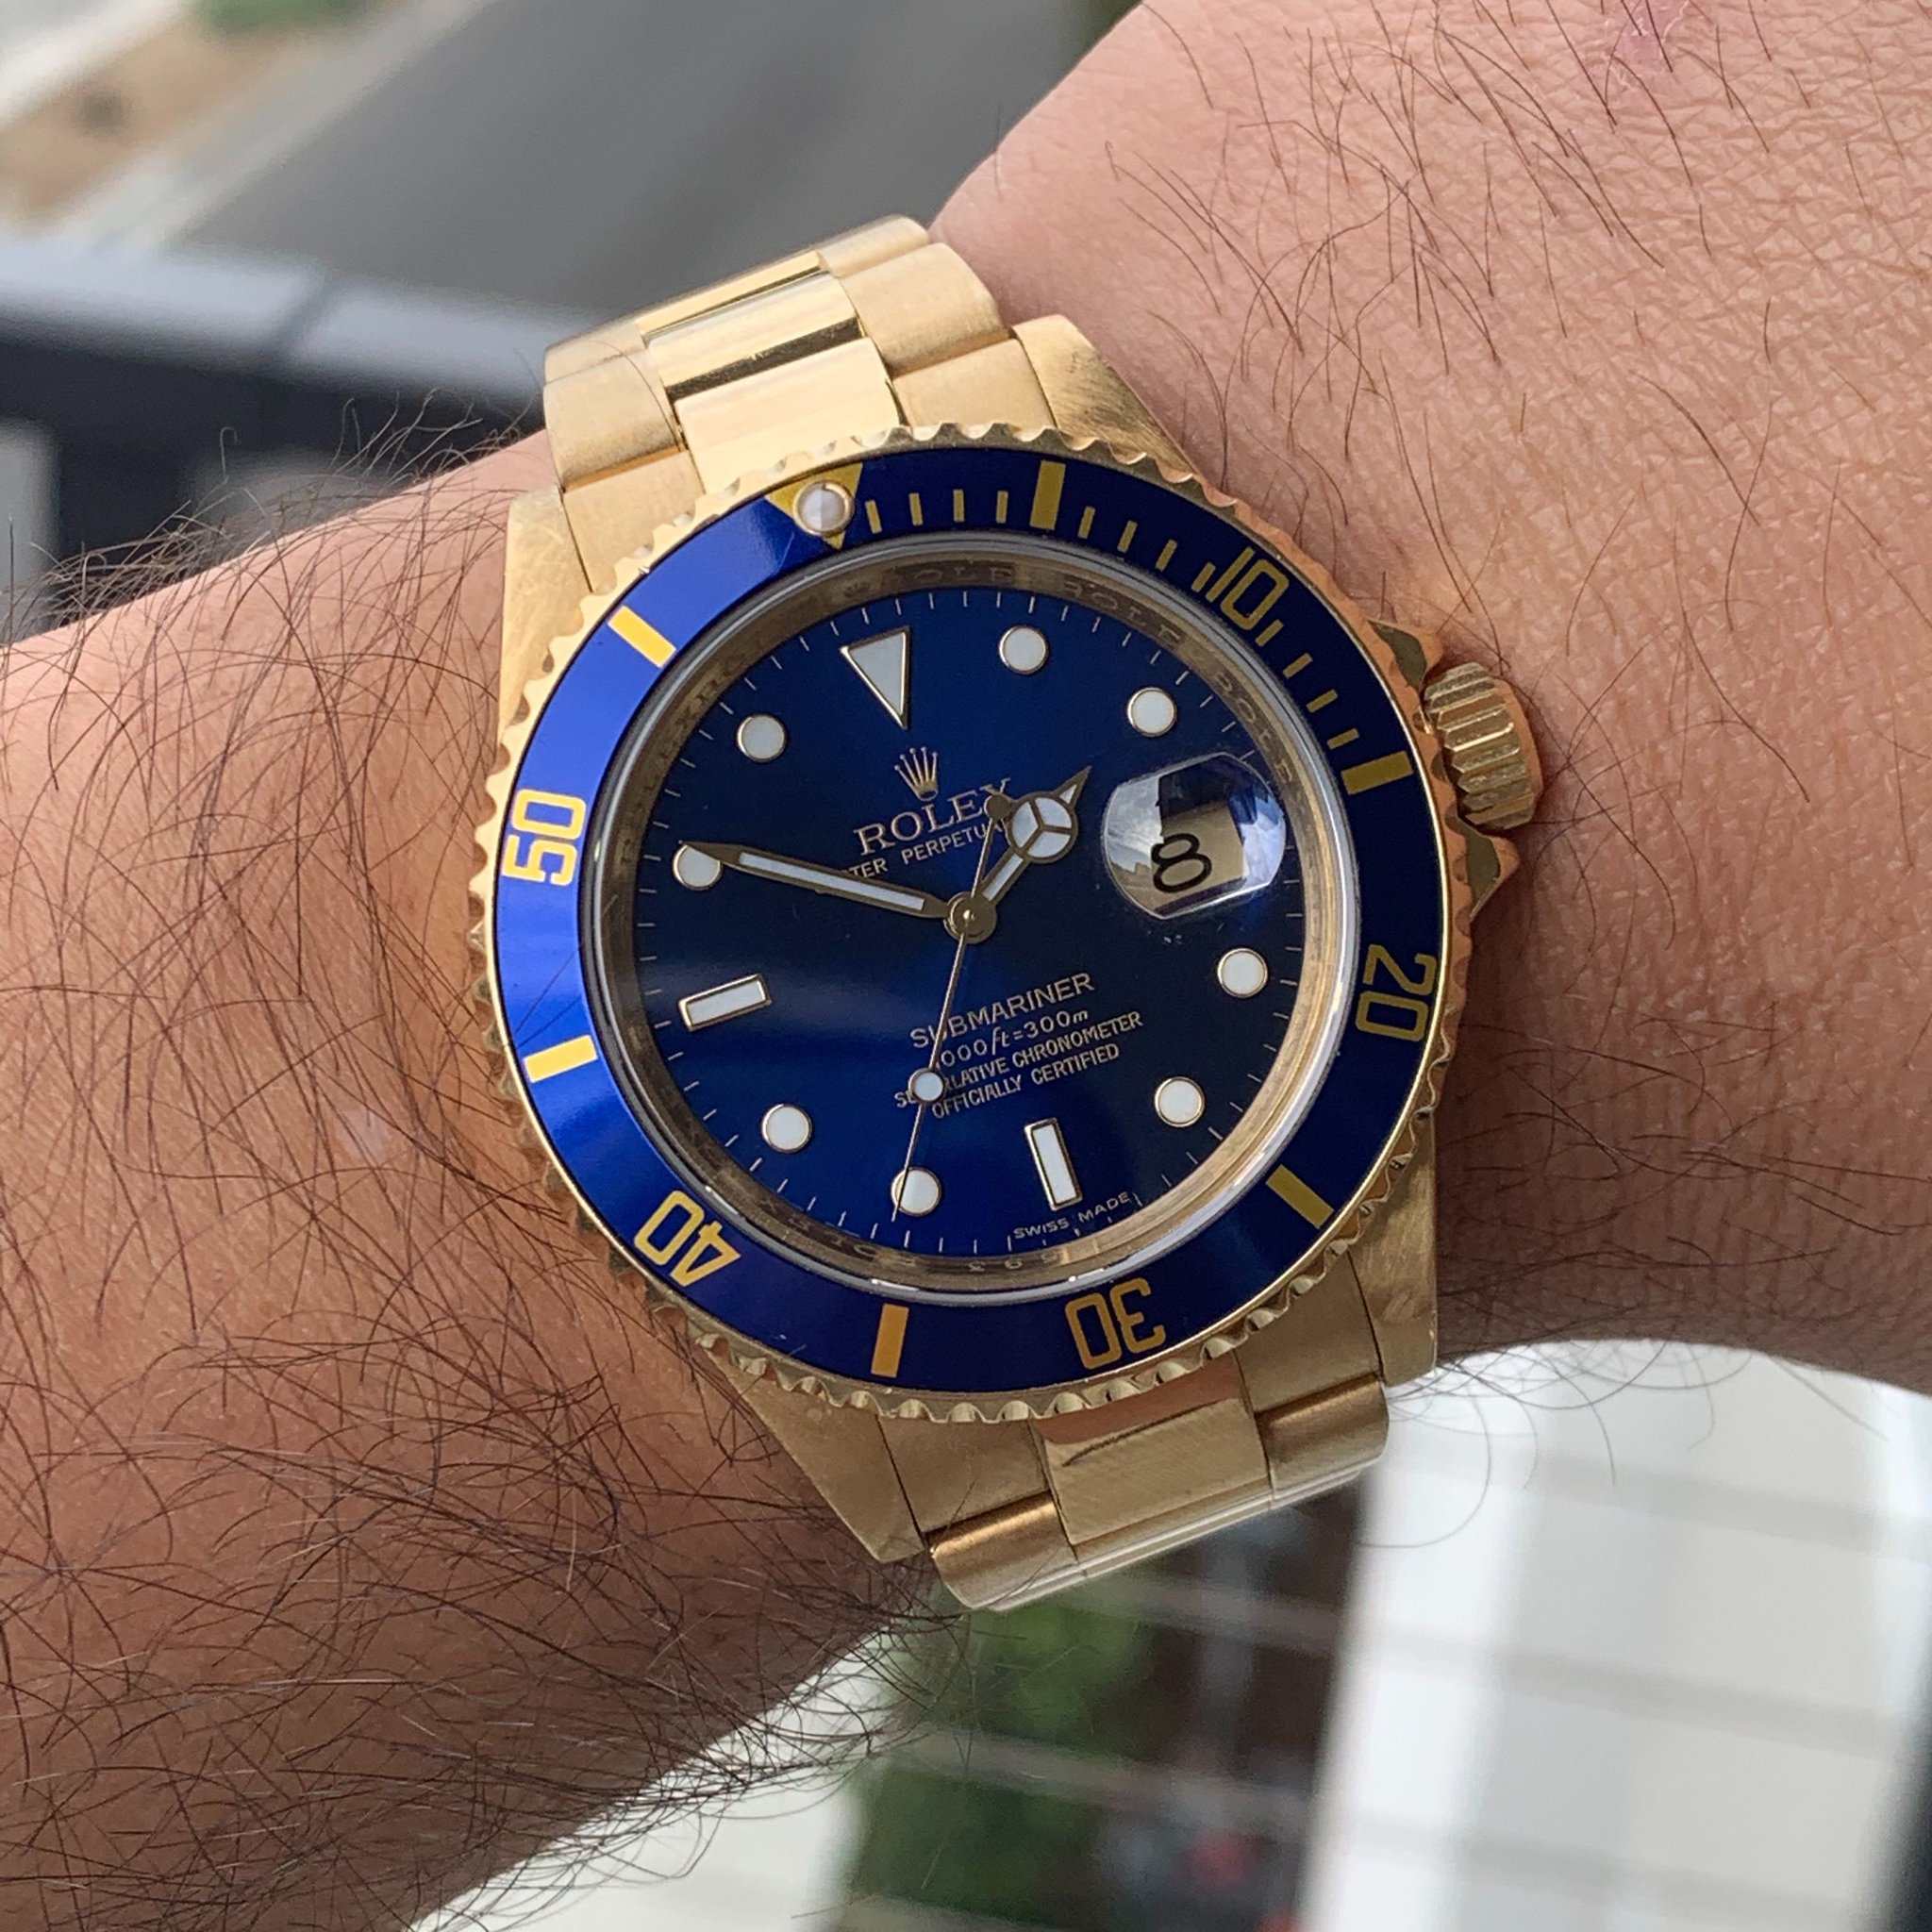 Airfield skrige foretrækkes Watch Gang on Twitter: "It's #WristCheckWednesday, and just because you're  at home doesn't mean you shouldn't wear some of your favorite watches!  We're loving this #Rolex ref. 11618 18k gold #submariner 😍